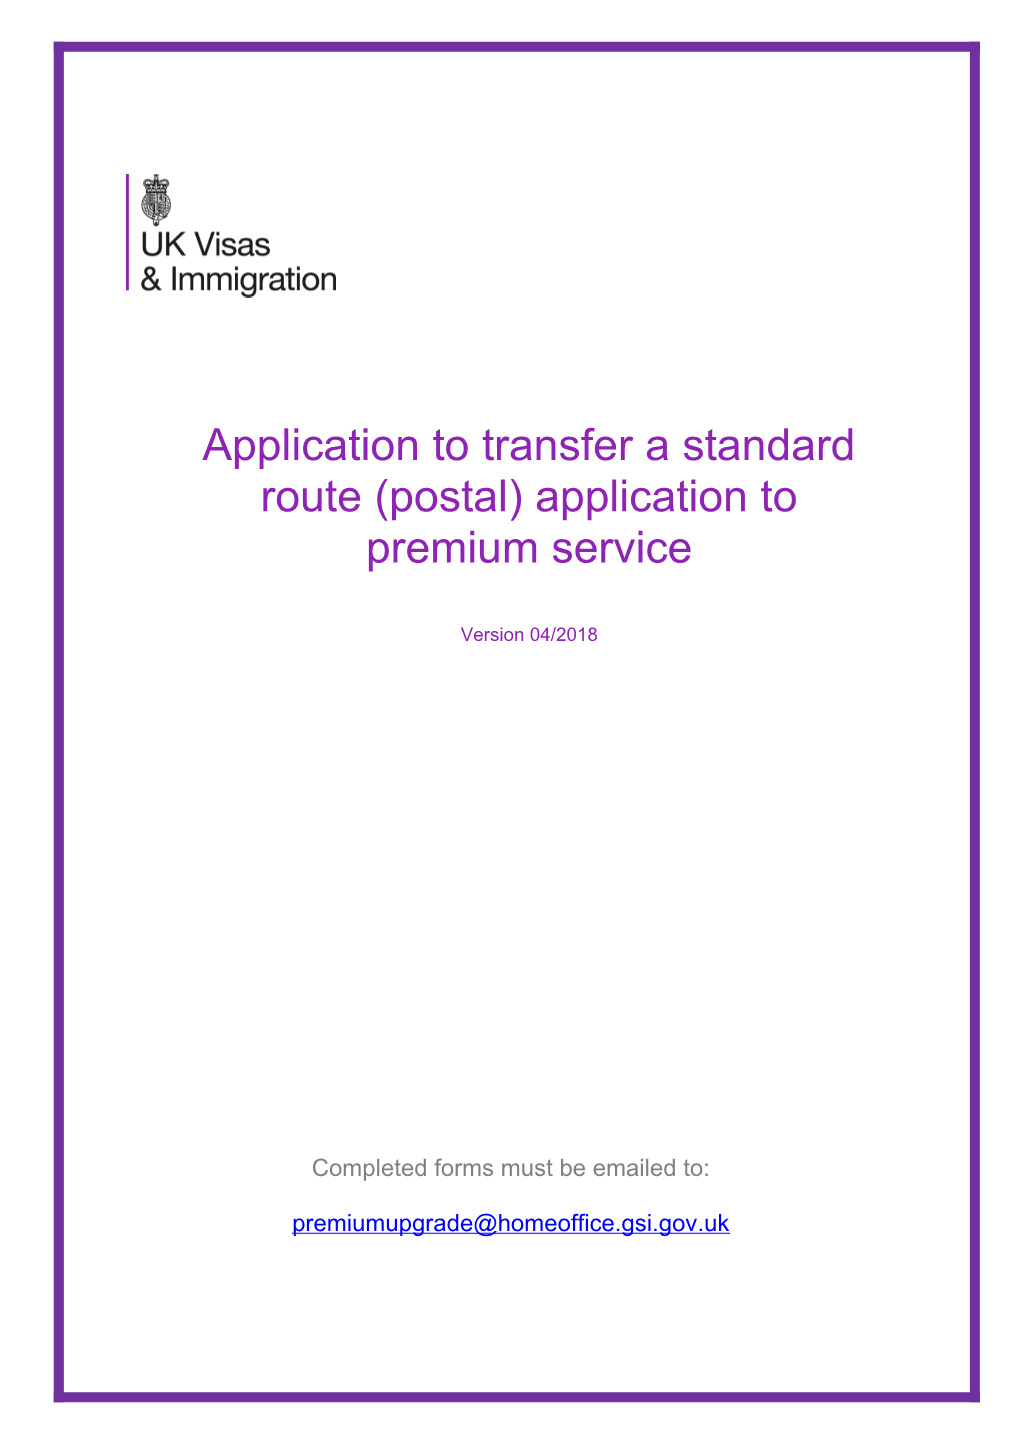 Application to Transfer a Standard Route (Postal) Application to Premium Service